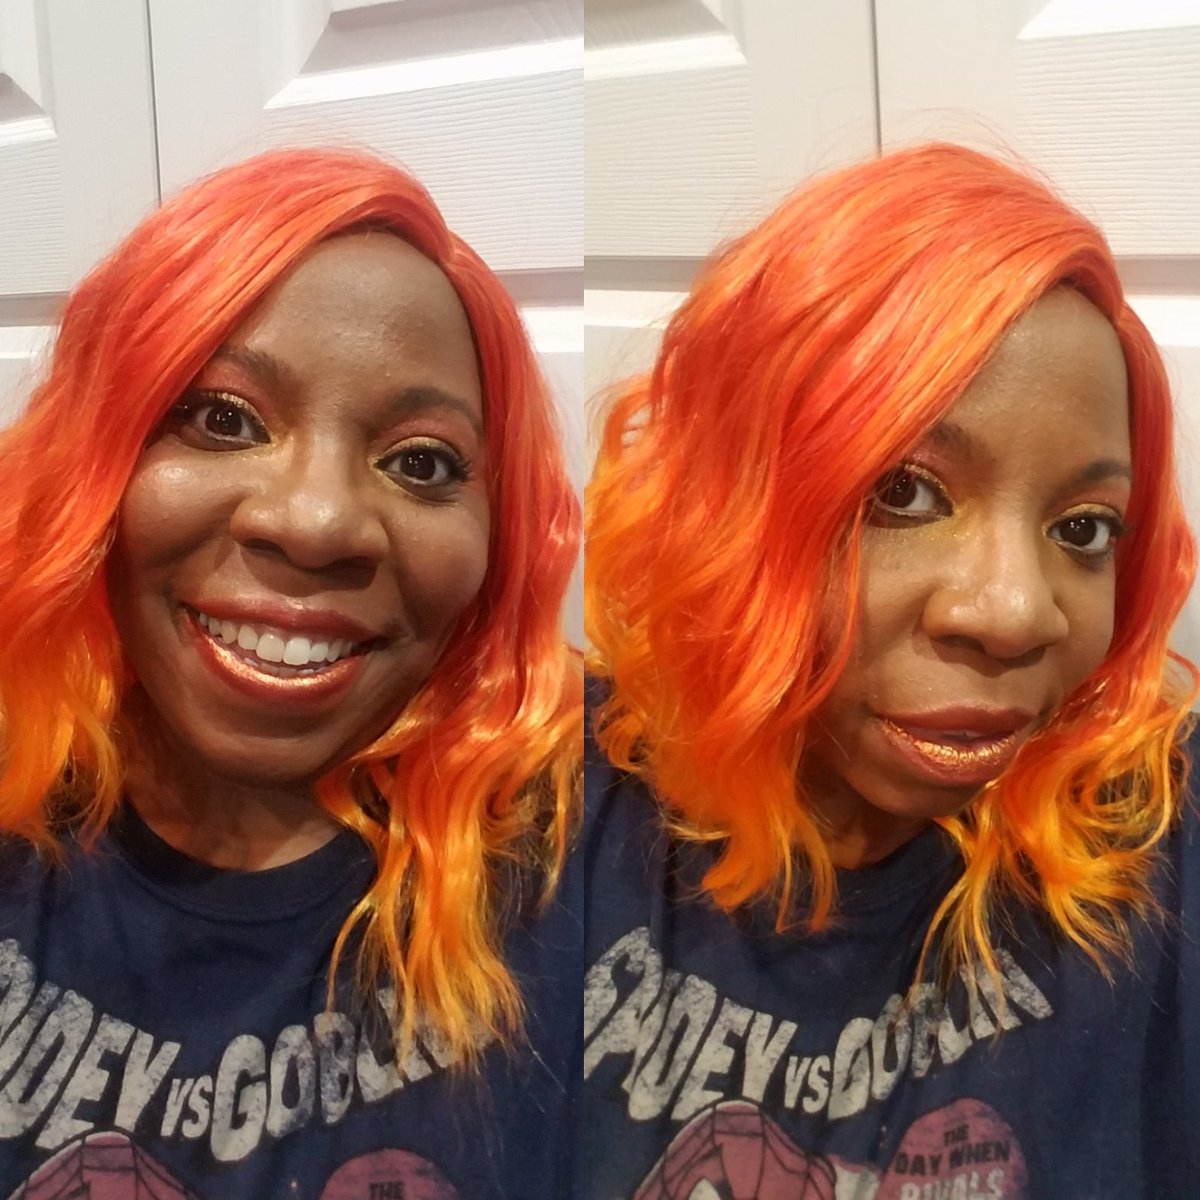 The vividness of this wig overshadows all my makeup attempts. Guess I'll figure out how to go bolder!

#OrangeHairDontCare #makeup #playing #CosplayMakeUp #blackjoy #CosplayAnyWay  #BreakingNormal #wigs